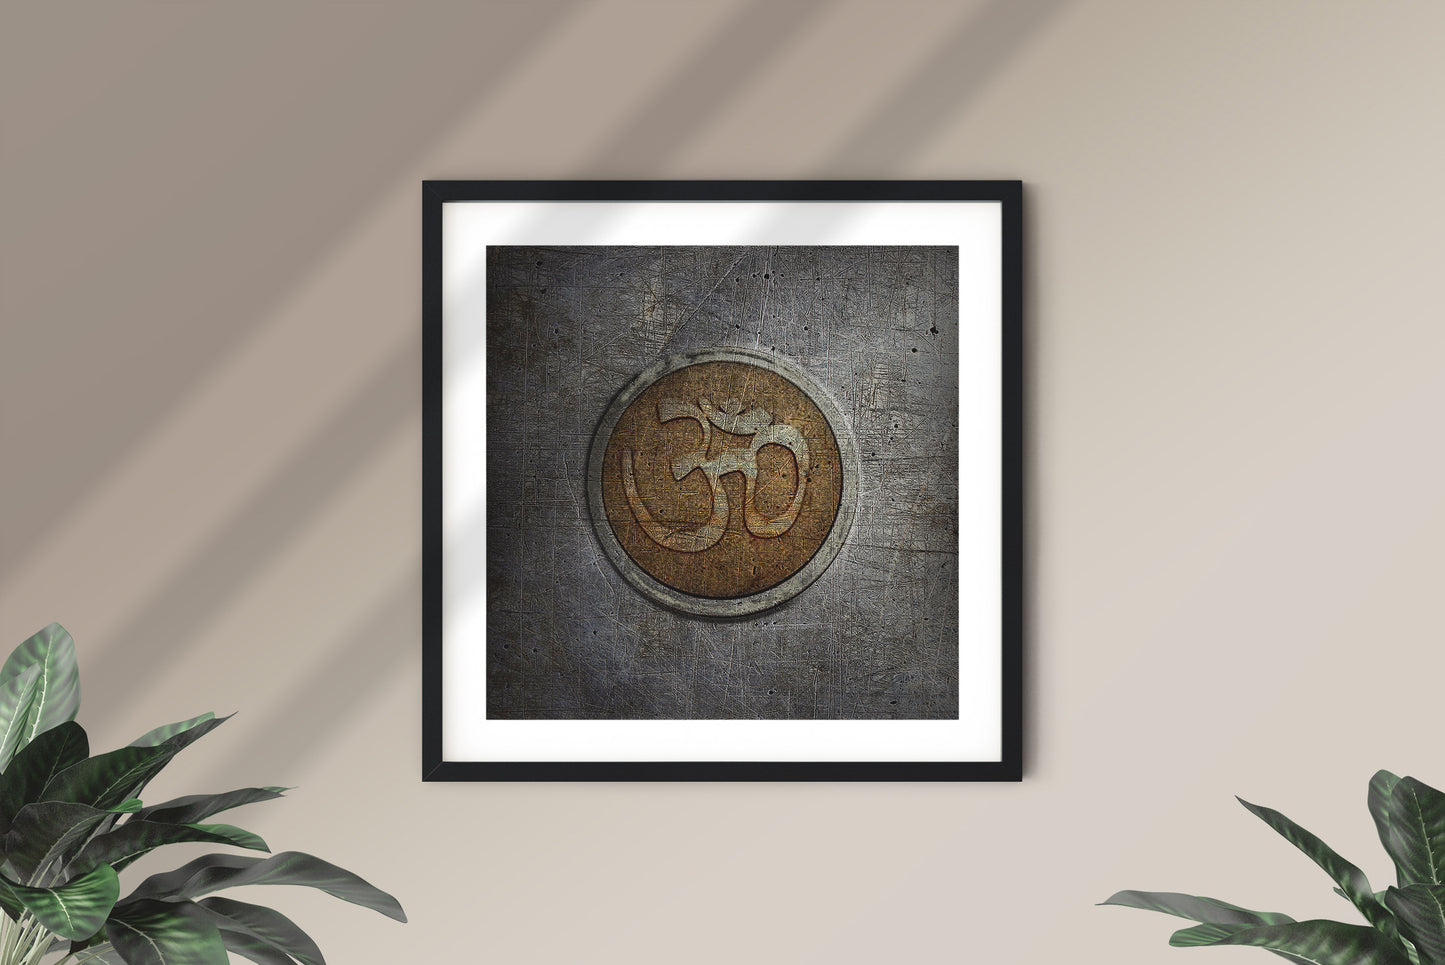 Golden Om Symbol on Distressed Stone - Museum-quality Art Print on Archival Paper framed and hung